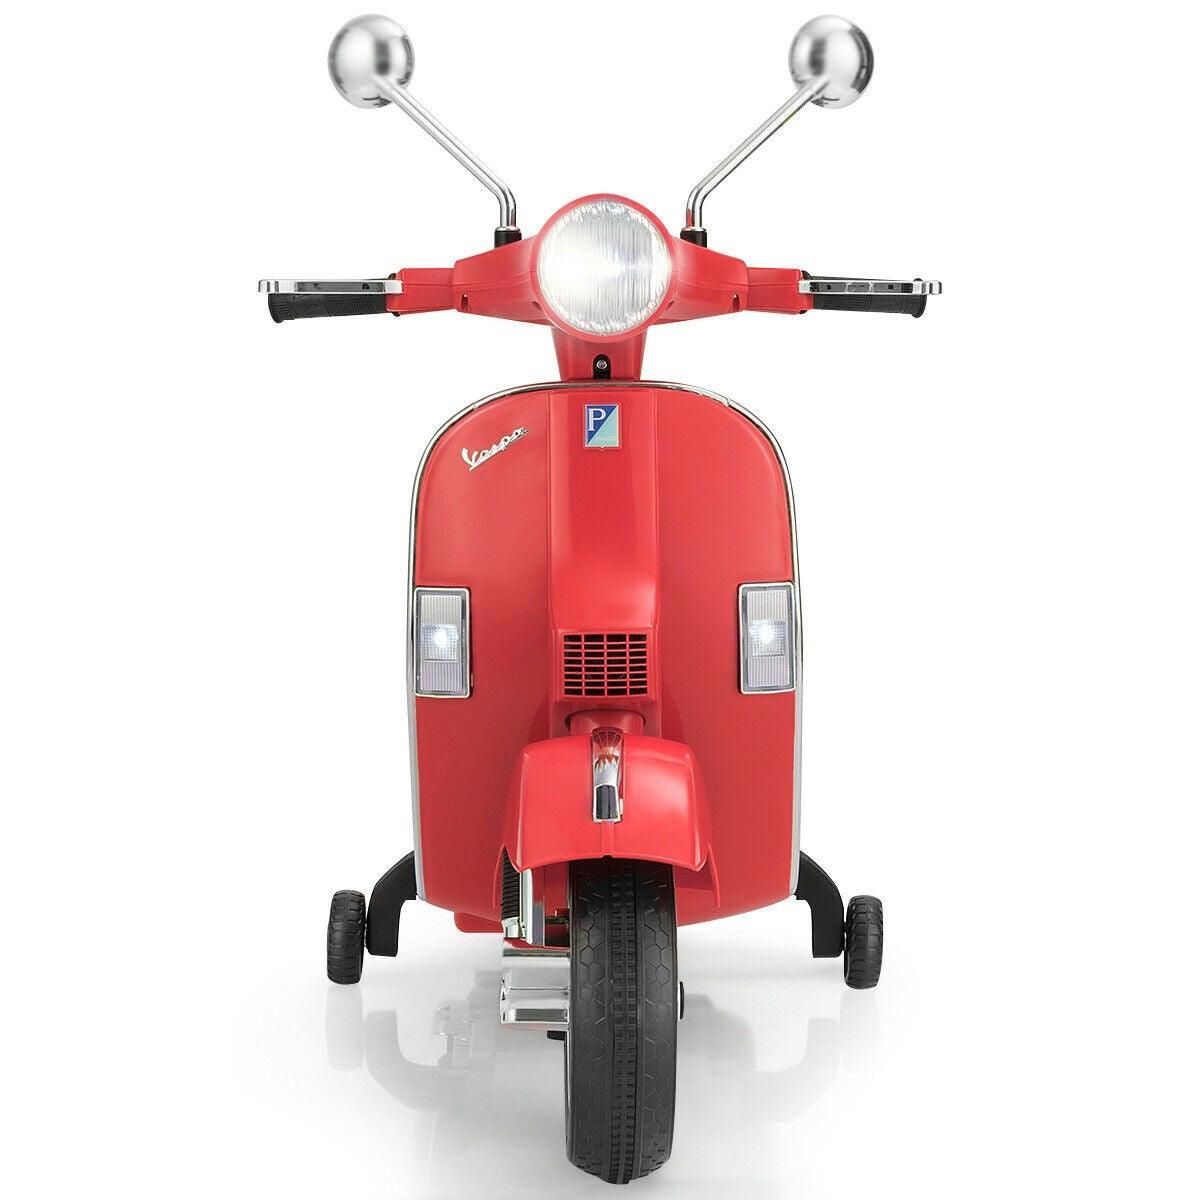 Scooter Motorcycle TY327441 with Headlight,face